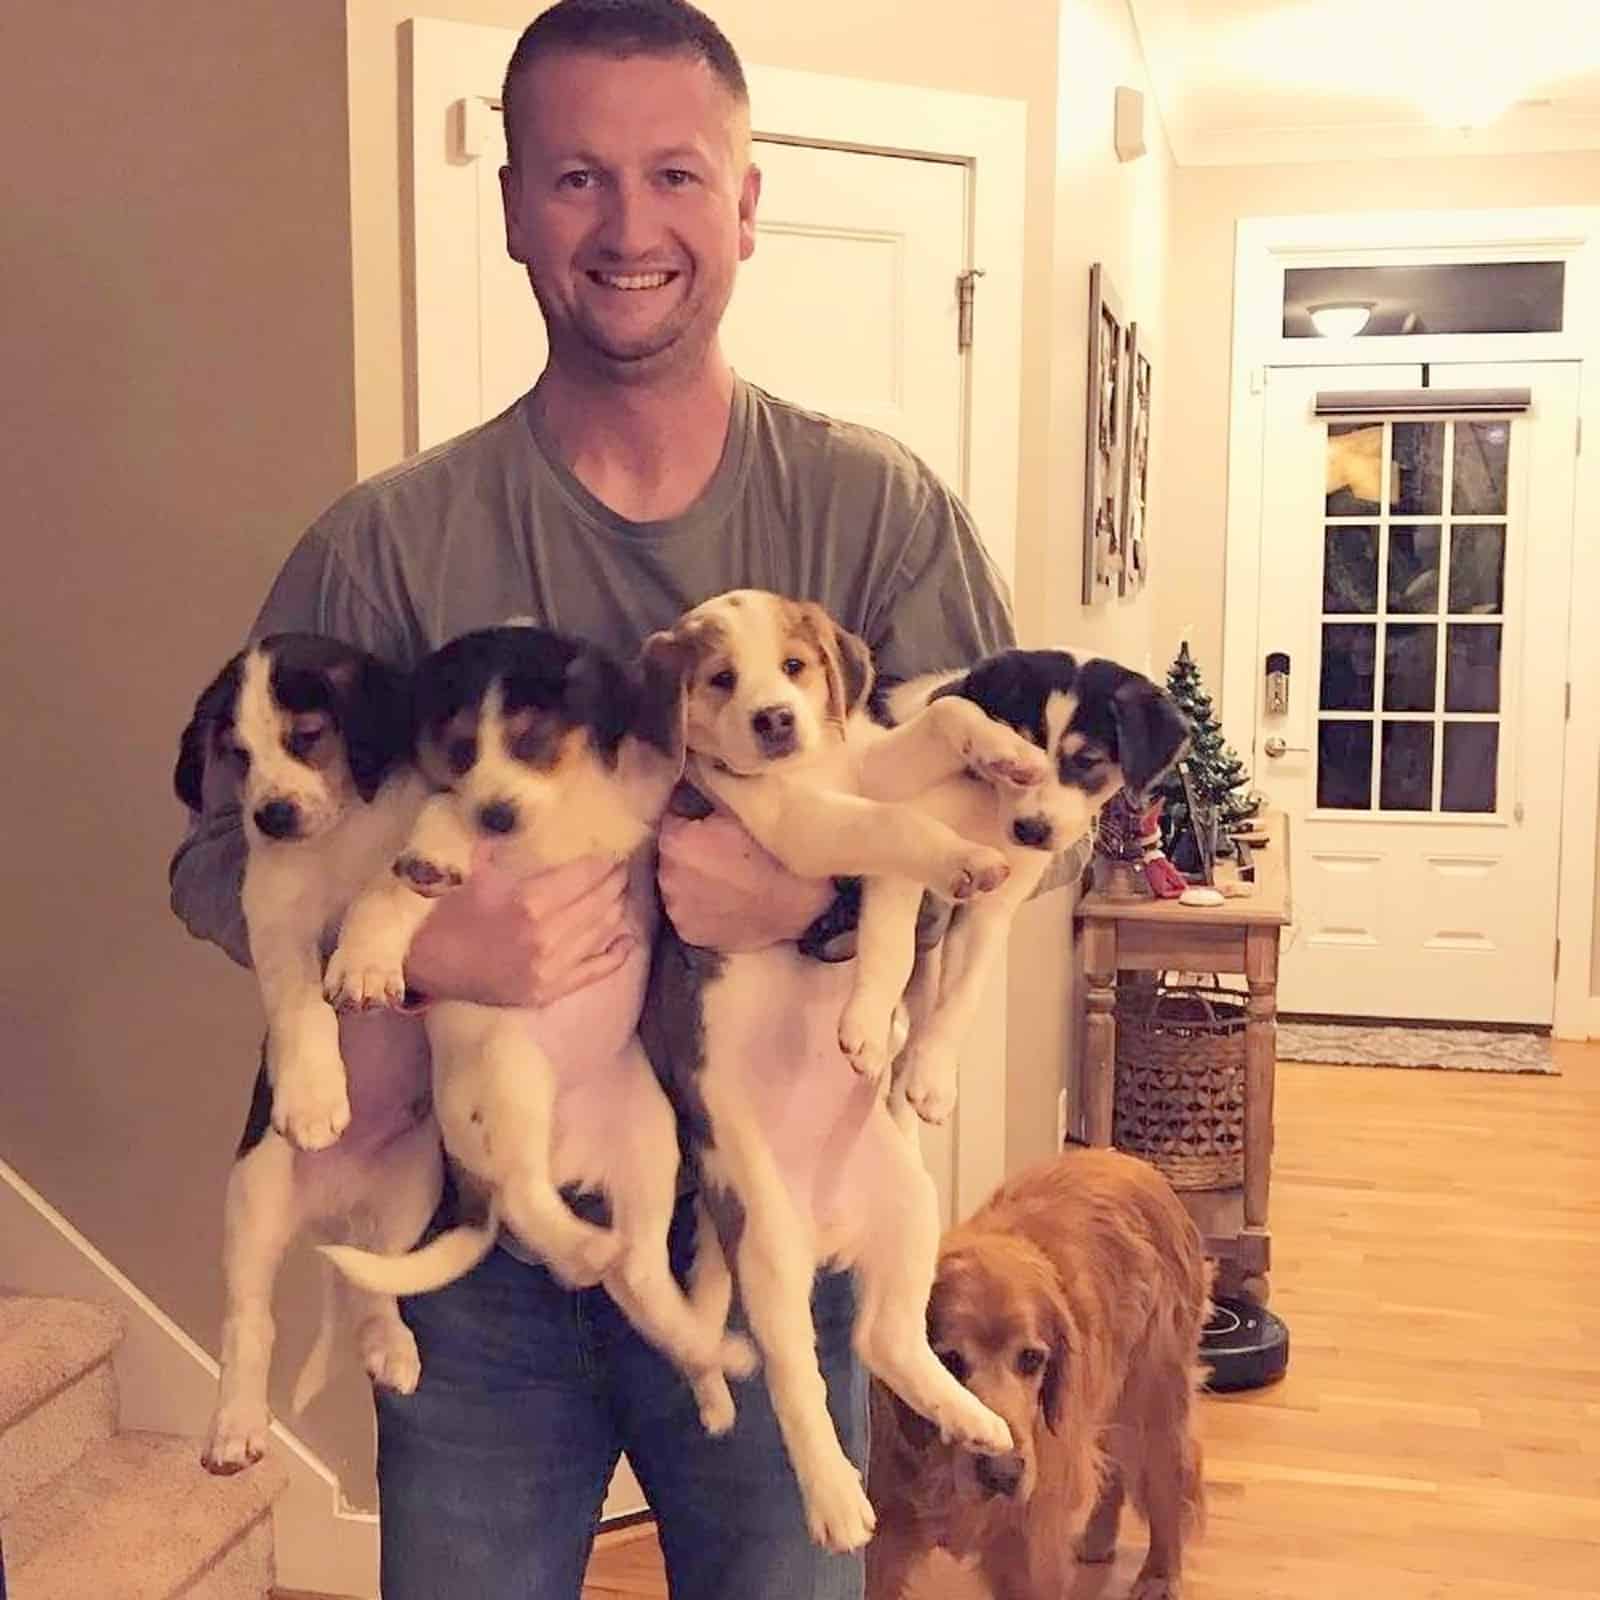 man holding four puppies in his arms at home